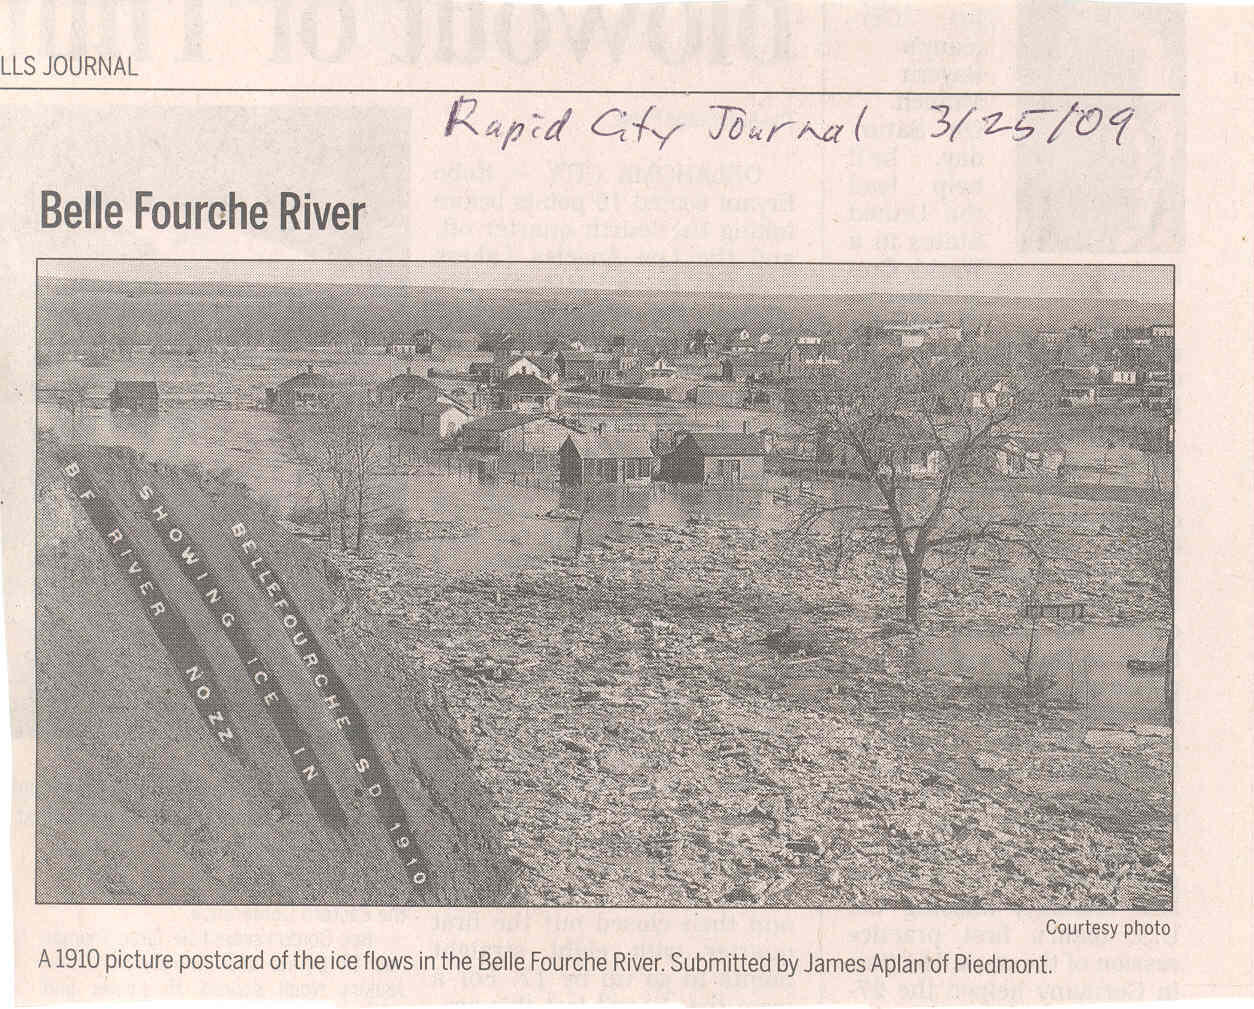 Rapid City Journal photo (March 25, 2009)